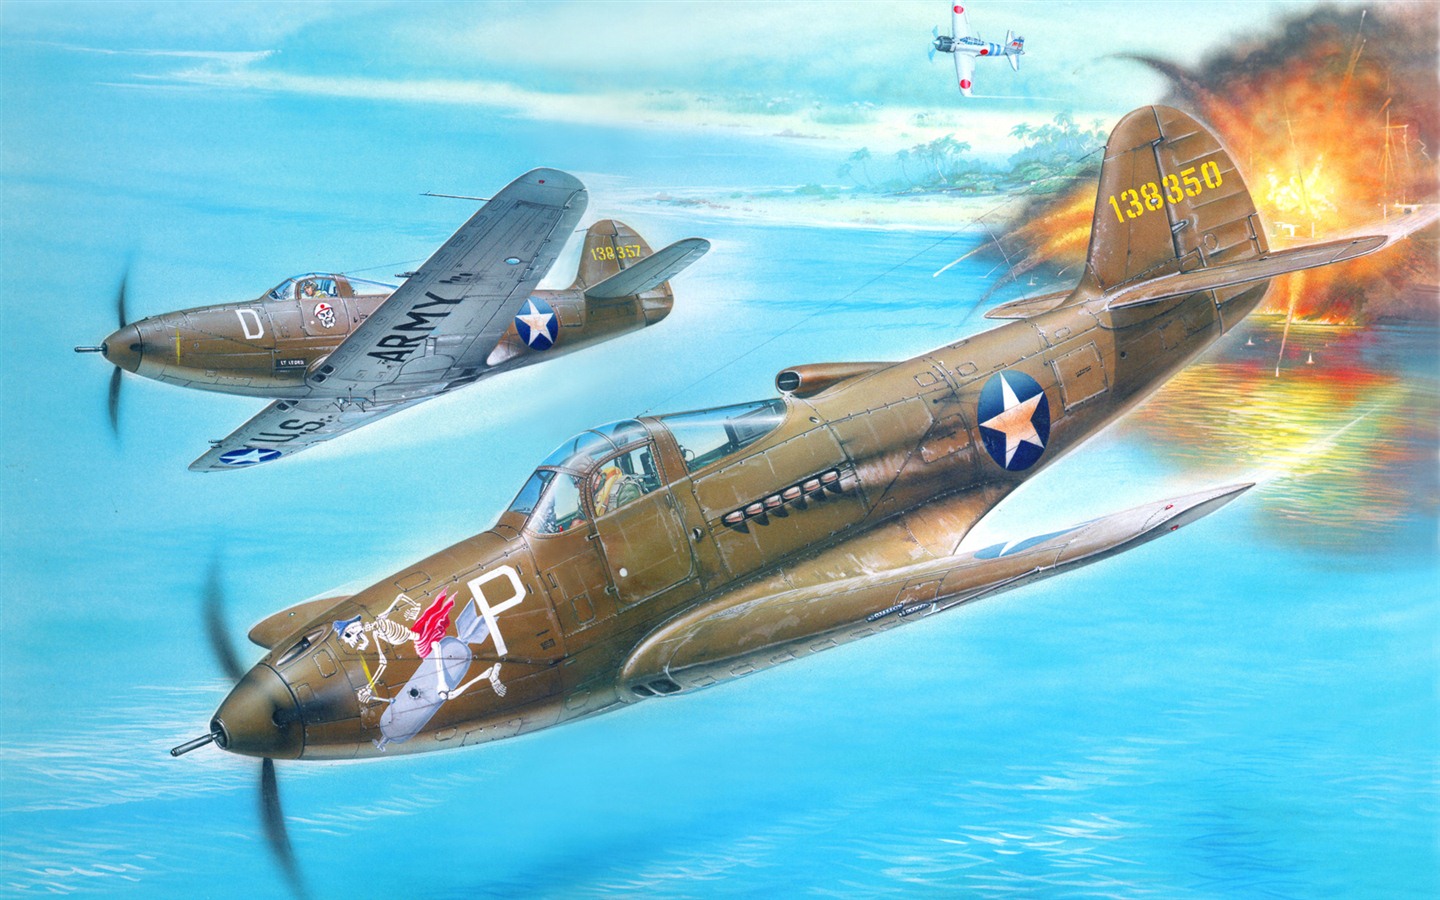 Military aircraft flight exquisite painting wallpapers #17 - 1440x900